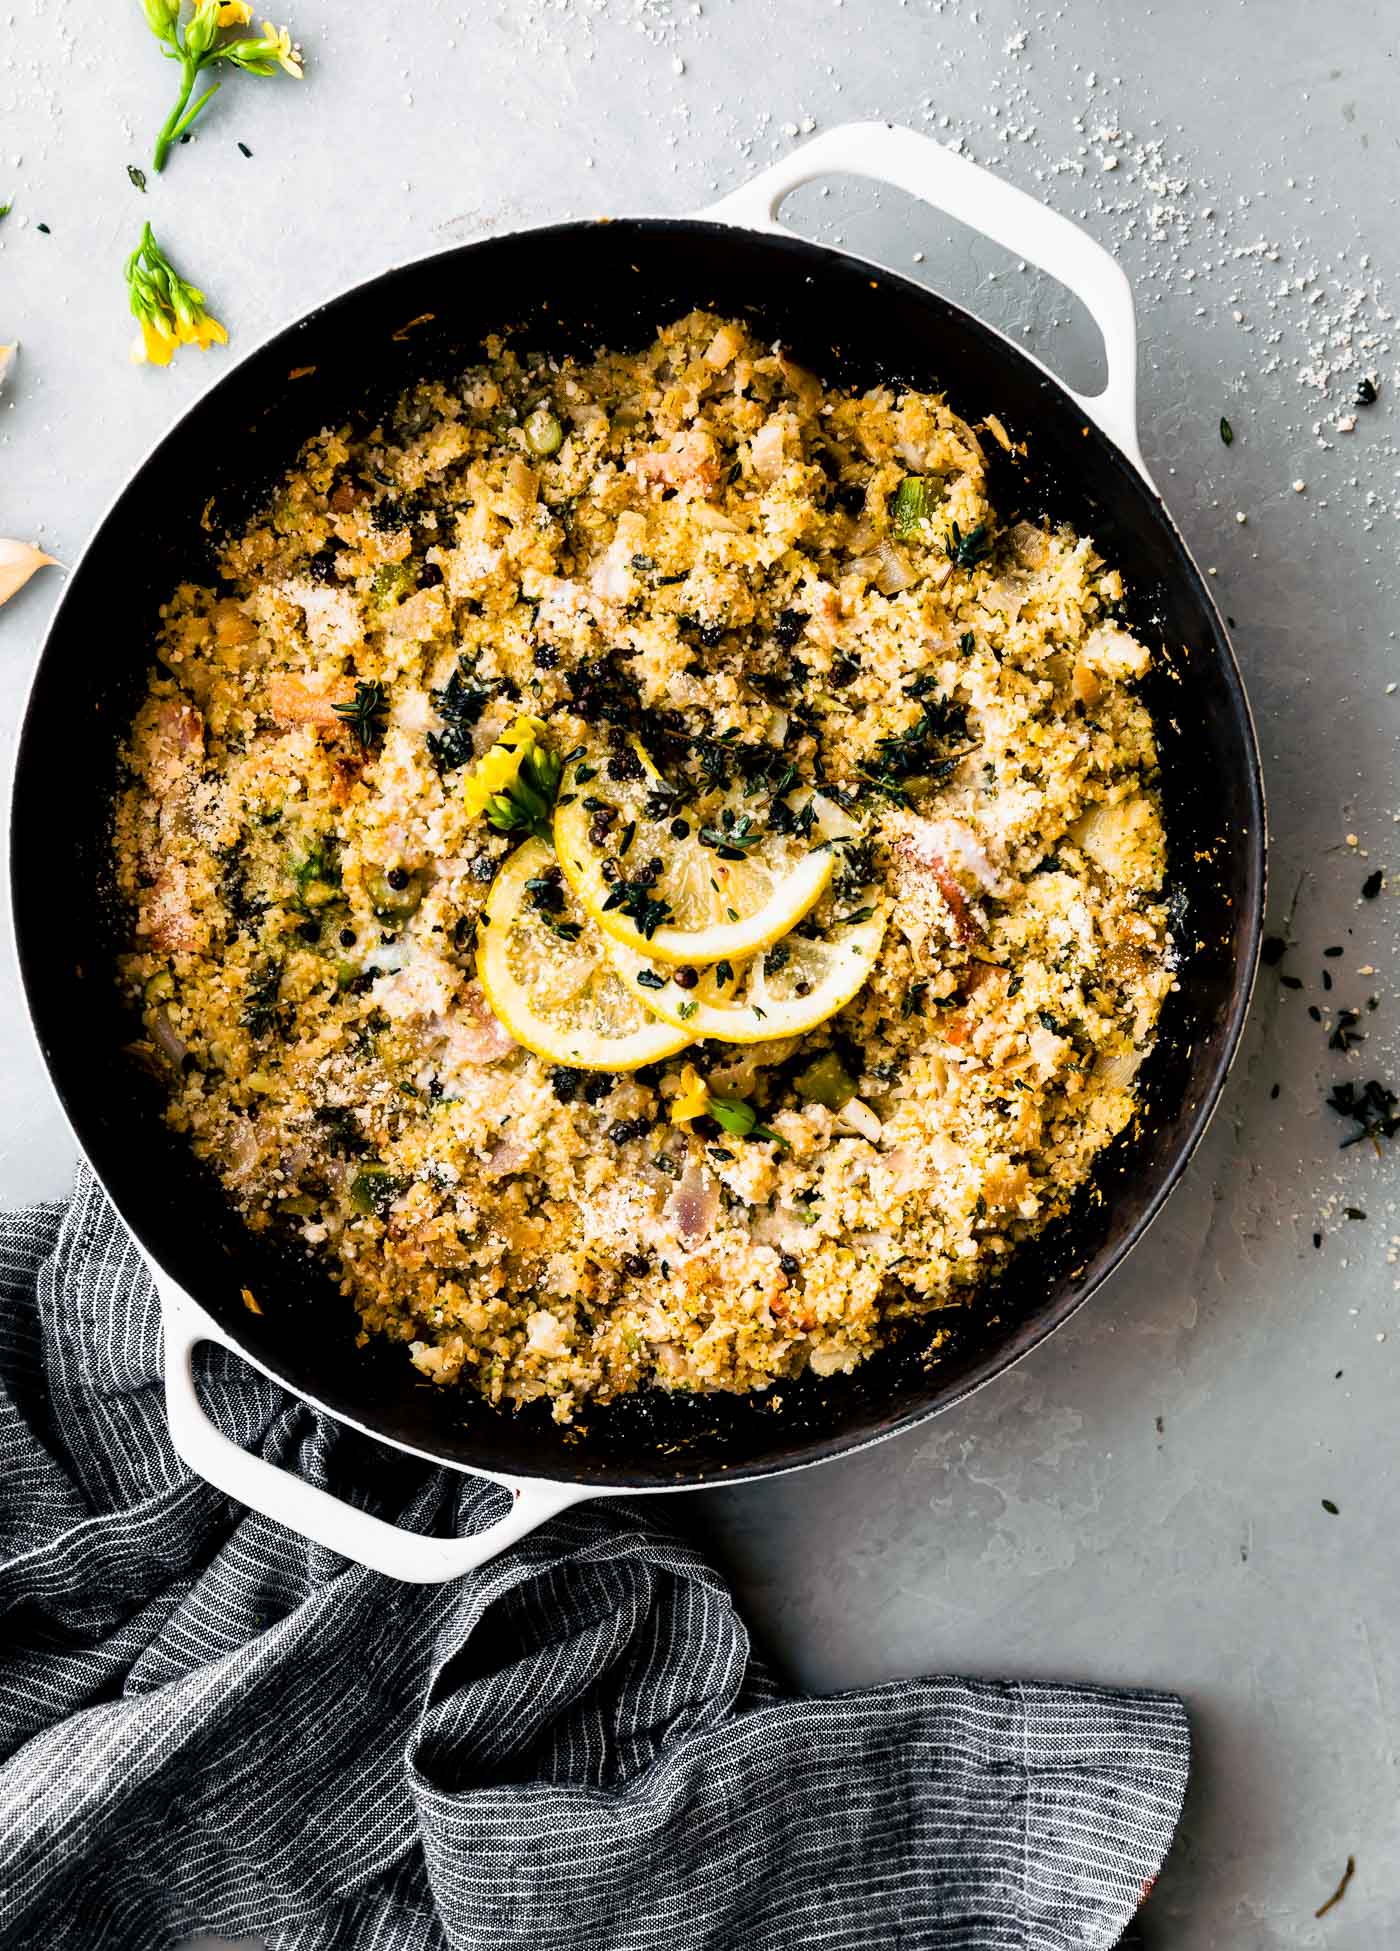 Riced Broccoli Cauliflower Risotto - This oven baked, low carb side dish recipe makes a lighter version of classic risotto that's kid-friendly and healthy! #cauliflowerrice #healthyrisotto #ricedbroccoli #lowcarbsides